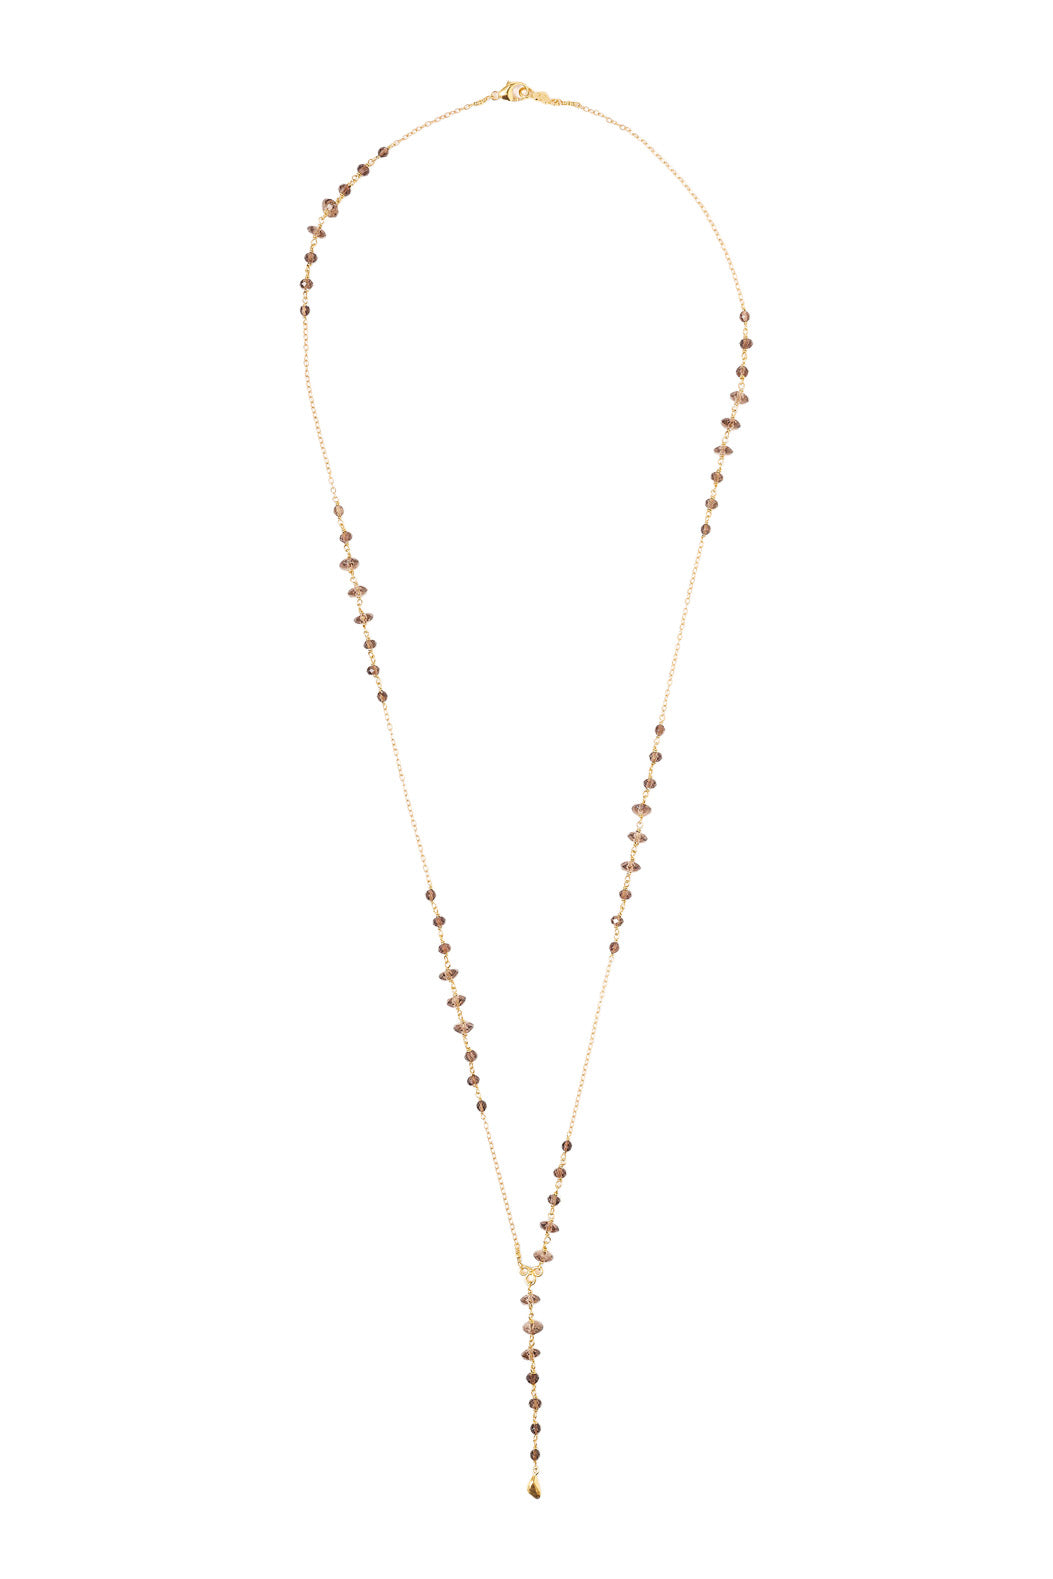 Chan Luu Lariat Beaded Necklace in Yellow Gold